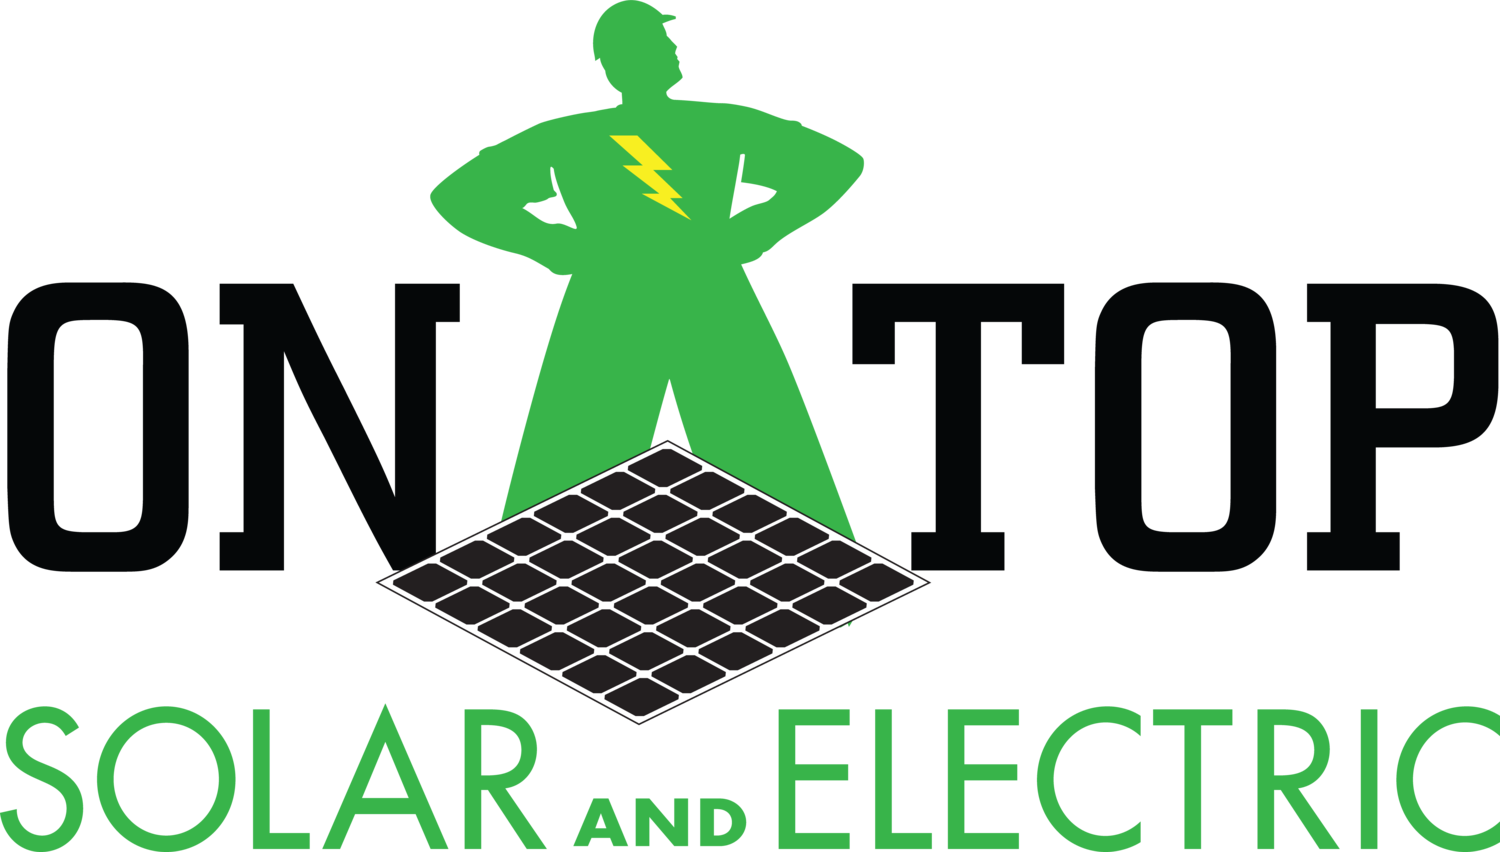 On Top Solar and Electric logo